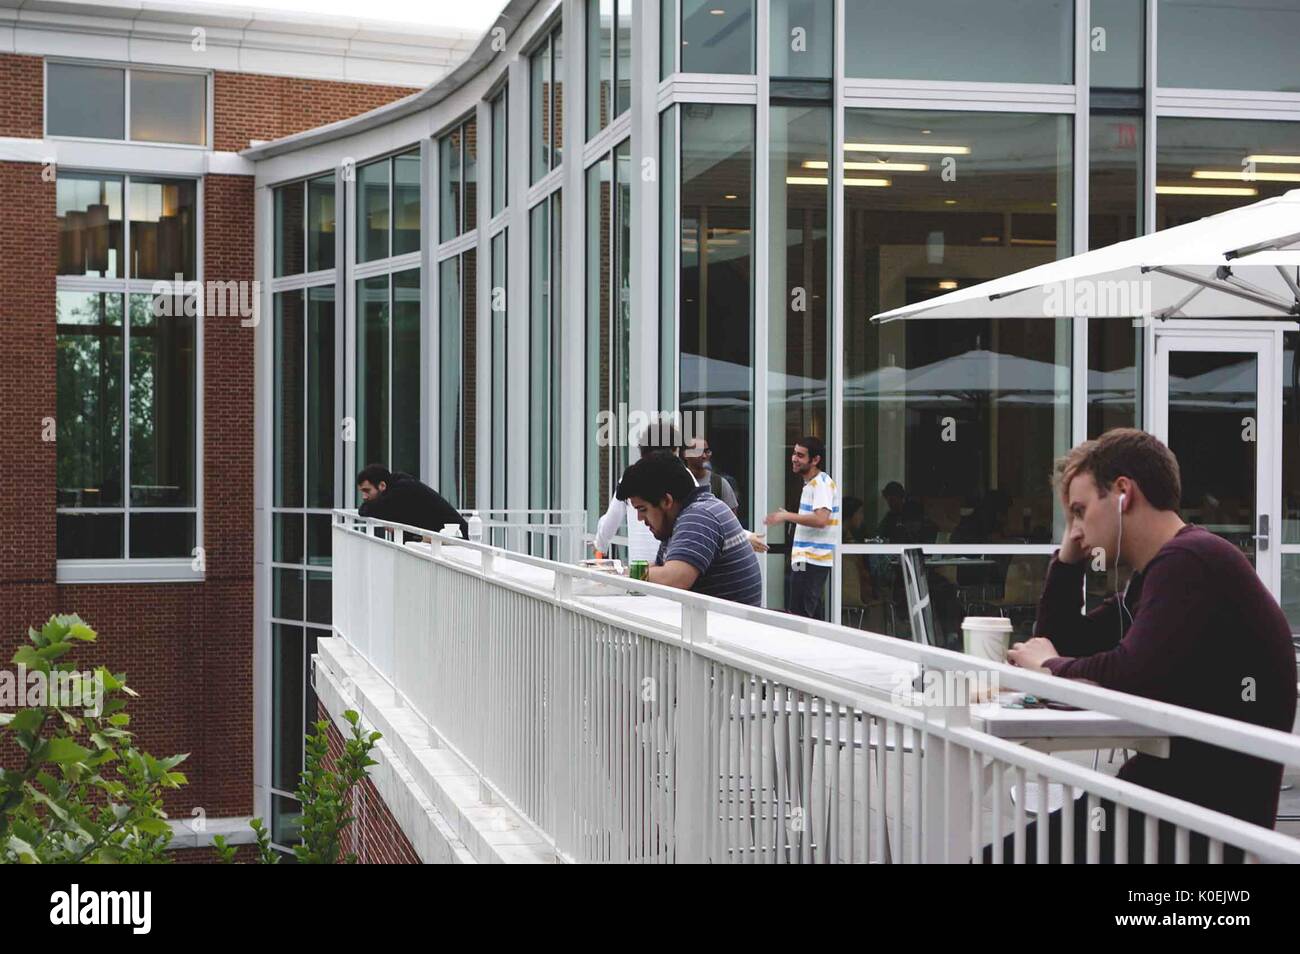 During finals period in May 2014, college students study, drink coffee, and socialize on the patio area outside of the Brody Learning Commons, an interactive/collaborative study space and library on the Homewood campus of the Johns Hopkins University in Baltimore, Maryland. 2014. Courtesy Eric Chen. Stock Photo